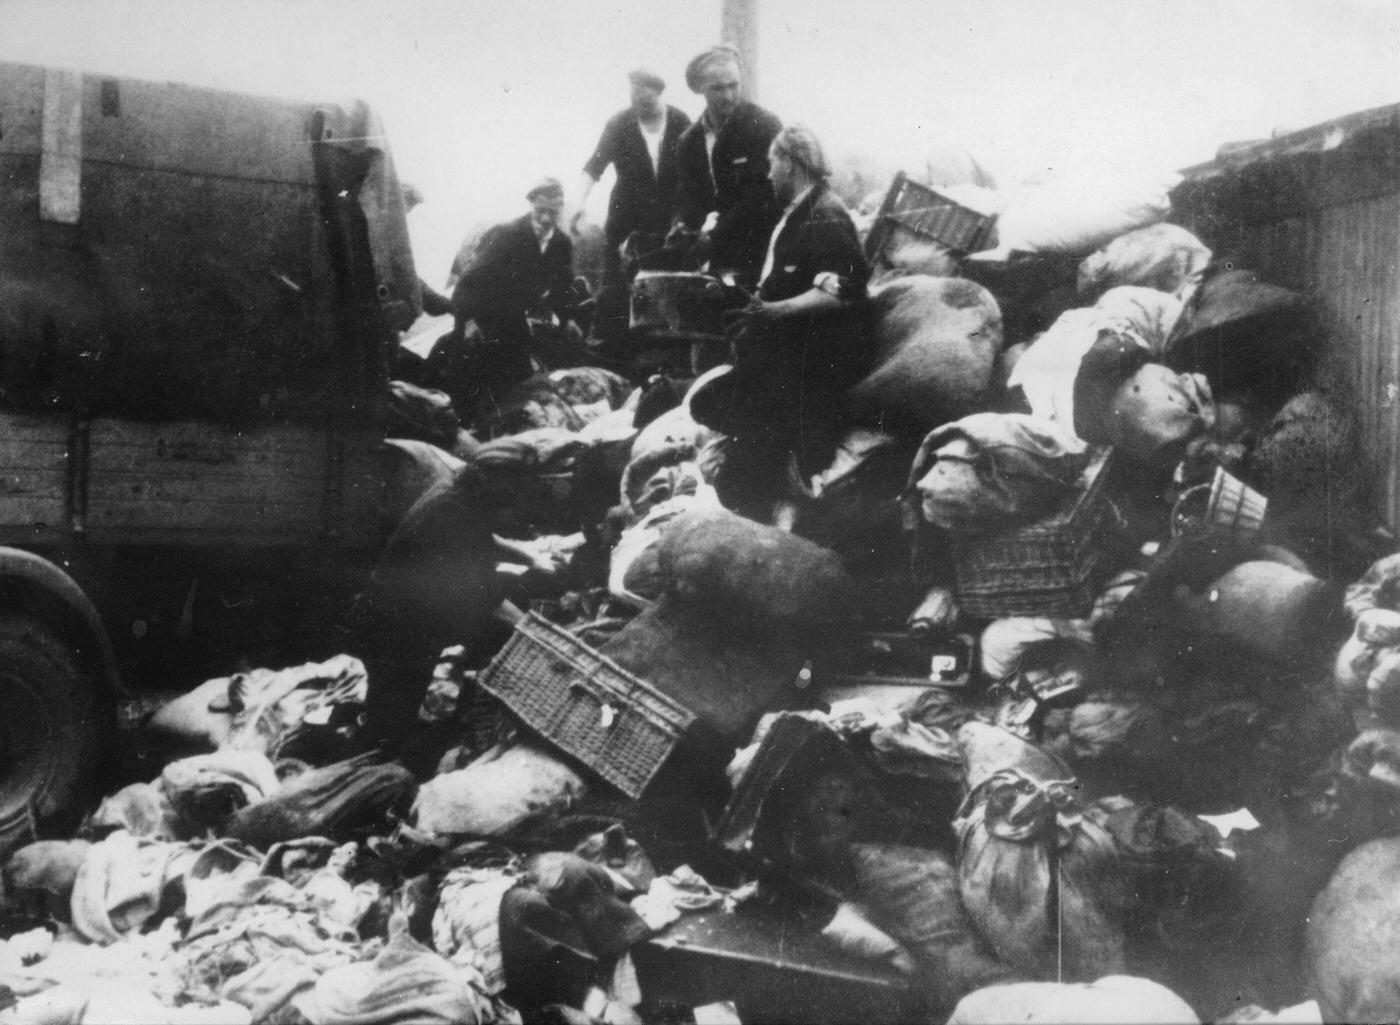 Belongings of deported Jews is searched for valuables, 1944